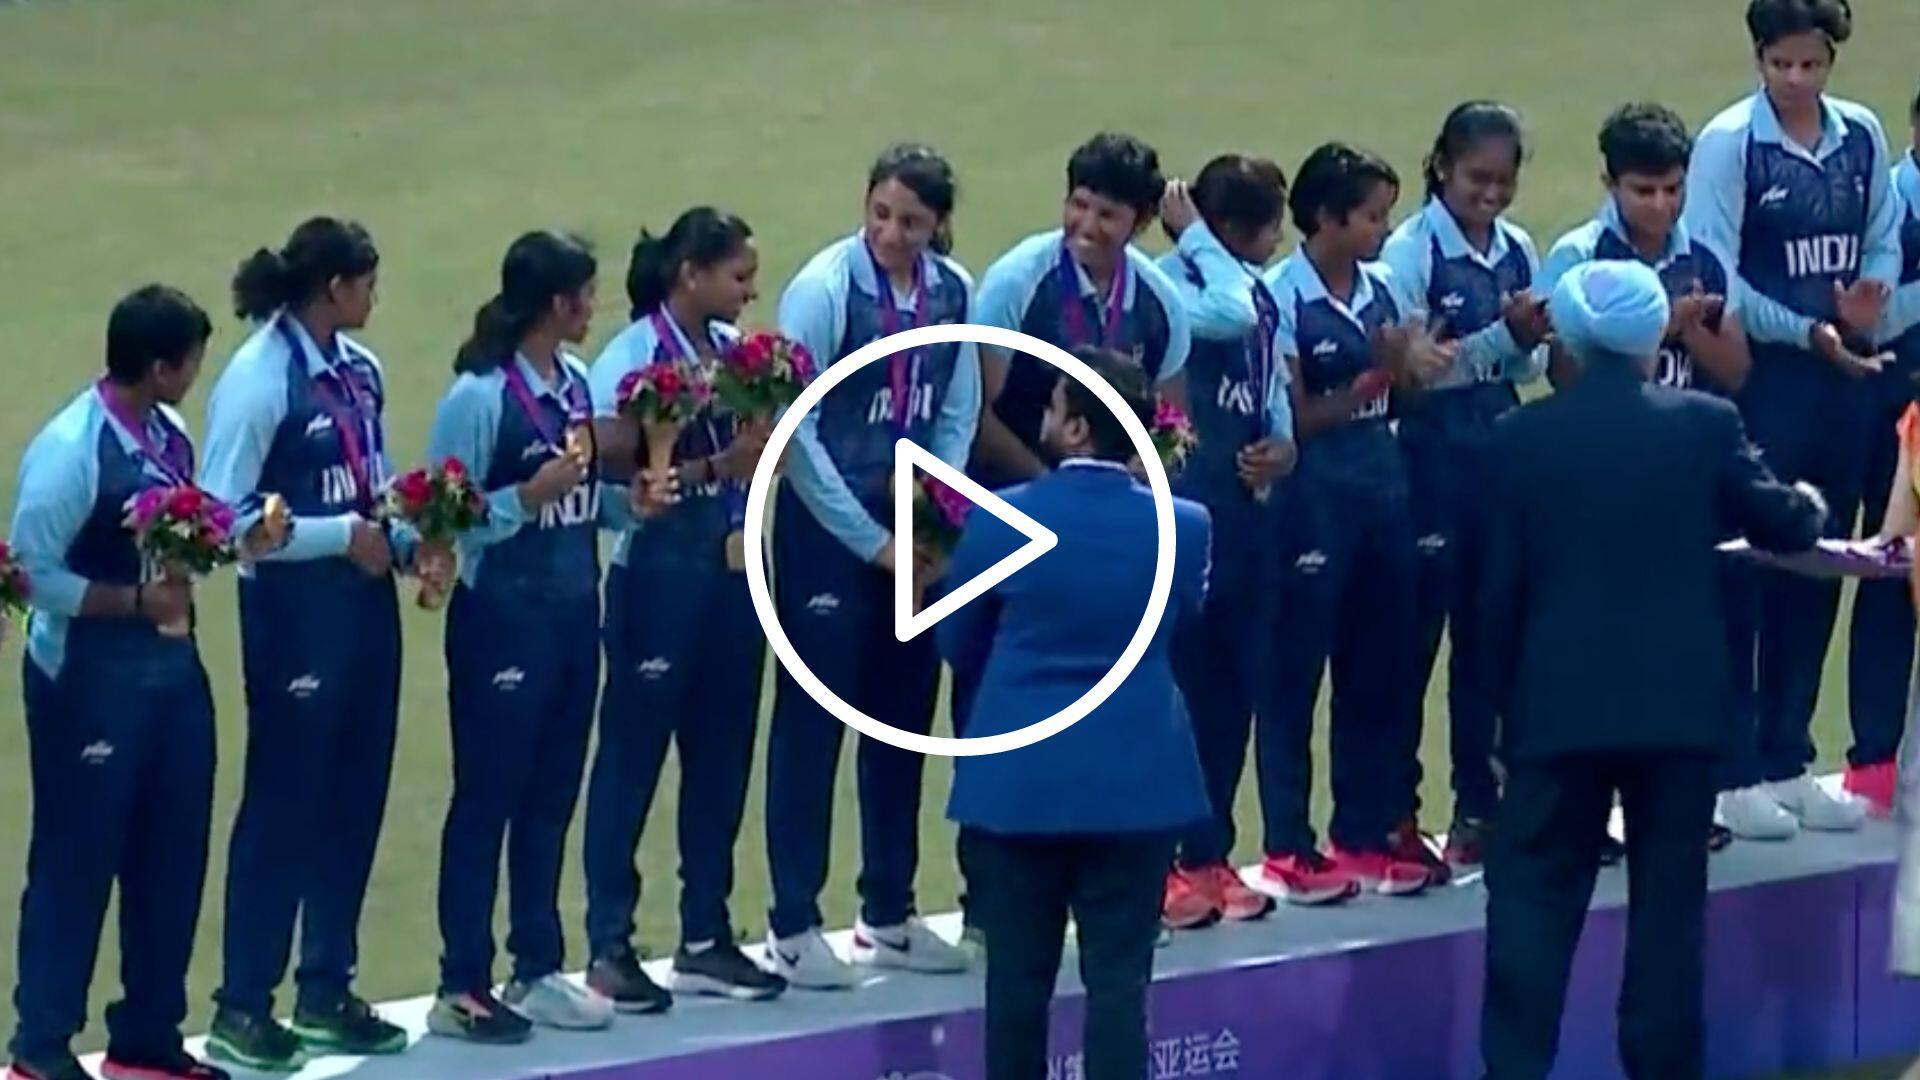 [Watch] Indian Players Get Gold Medals On Podium After Win In Asian Games Final